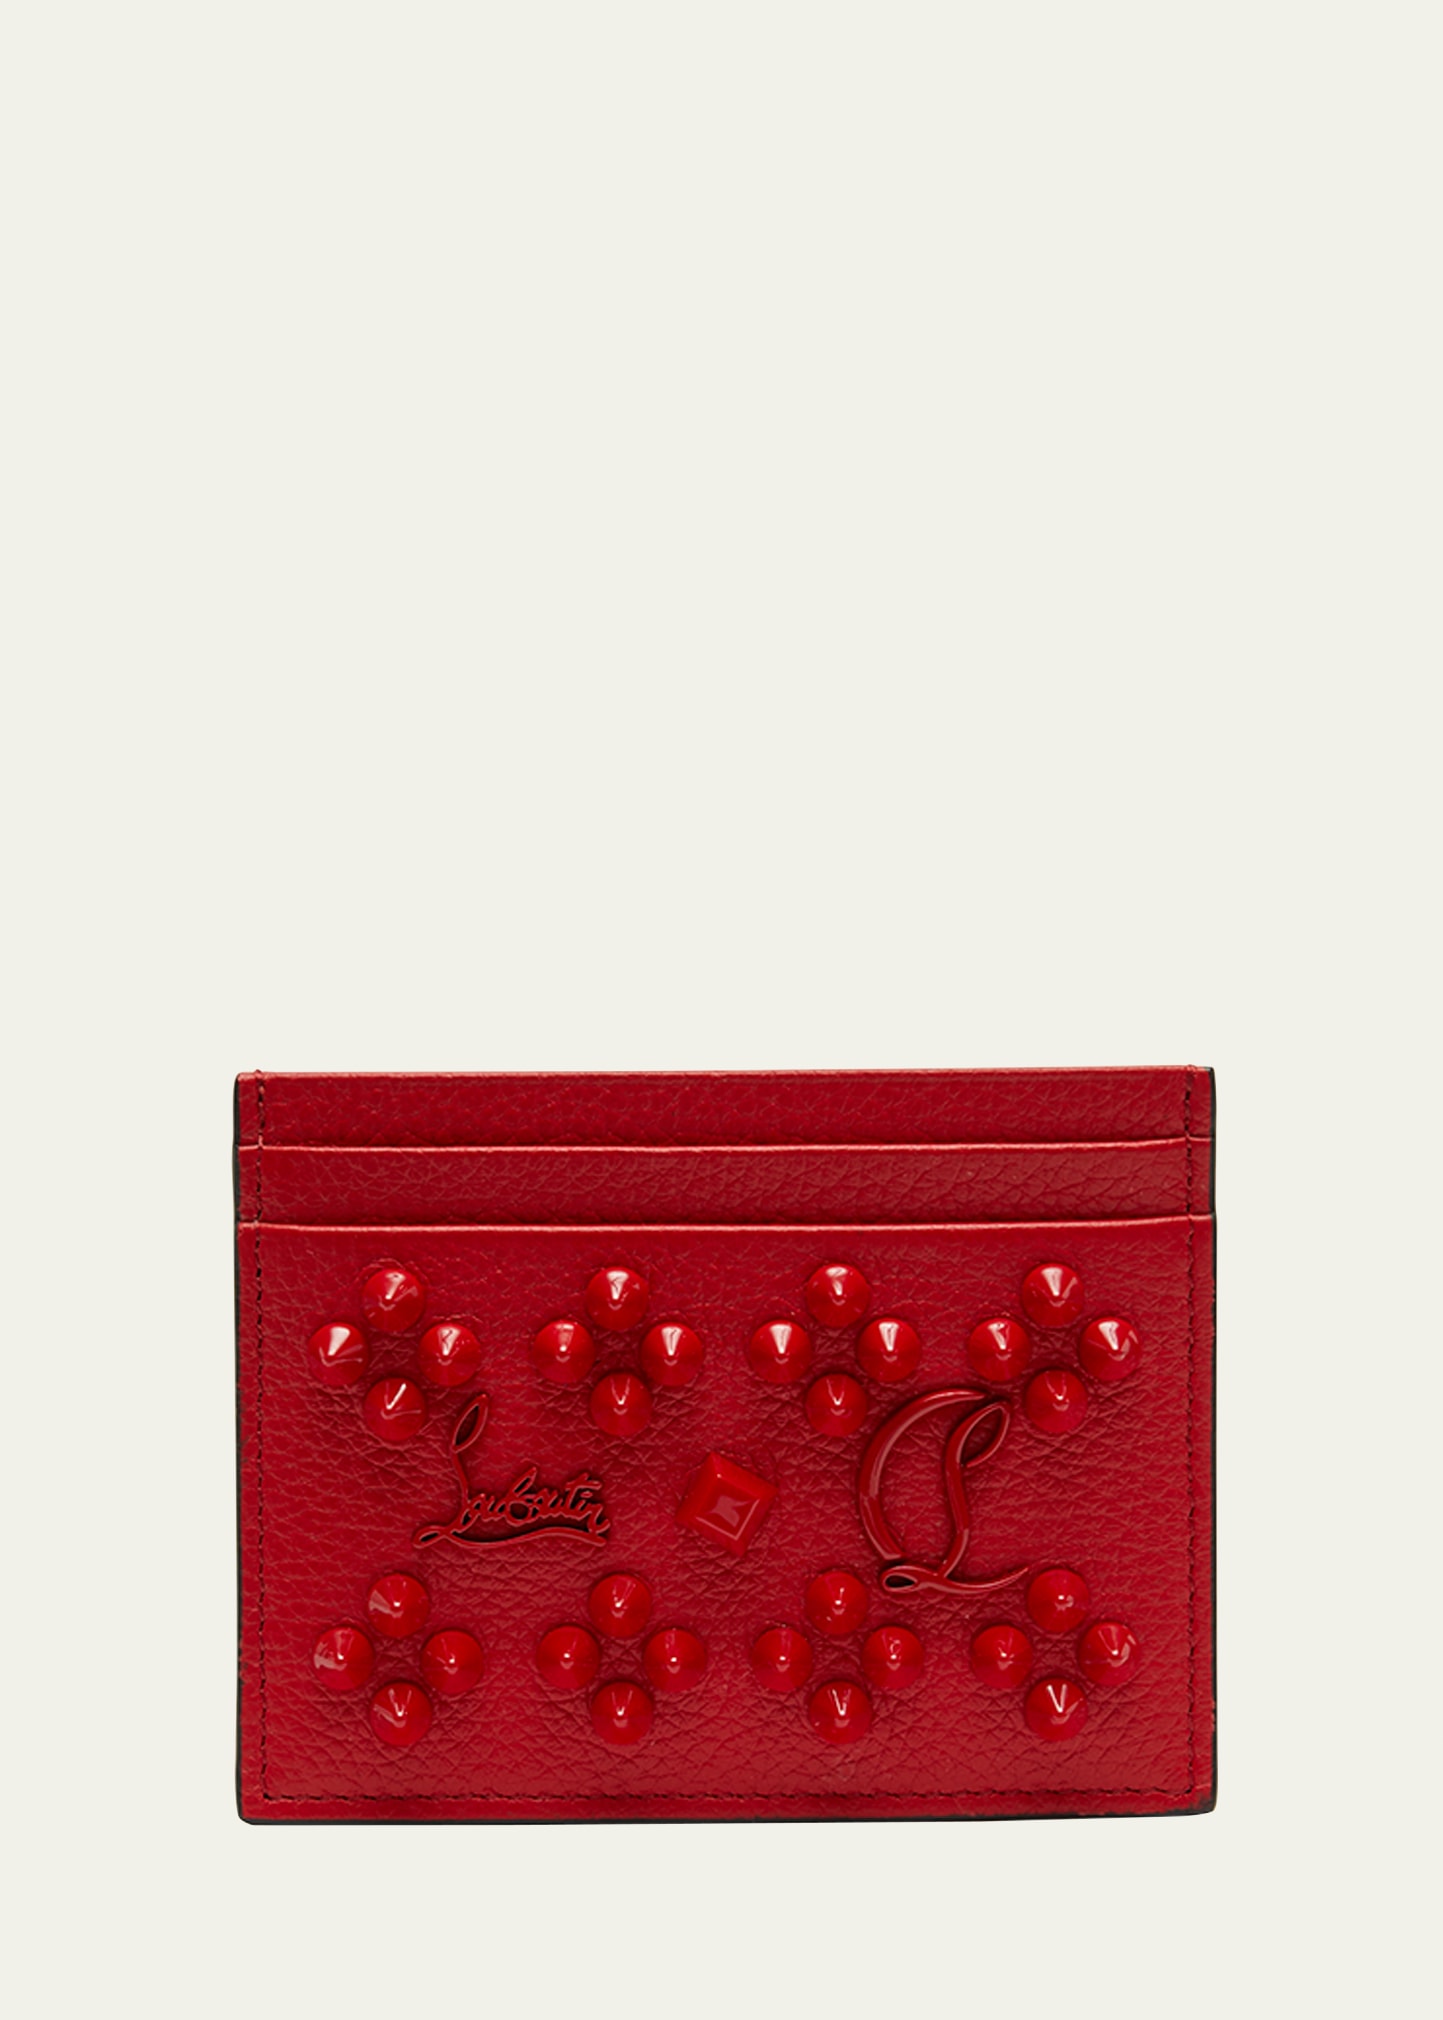 CHRISTIAN LOUBOUTIN KIOS CARD CASE IN LEATHER WITH LOUBINTHESKY SPIKES